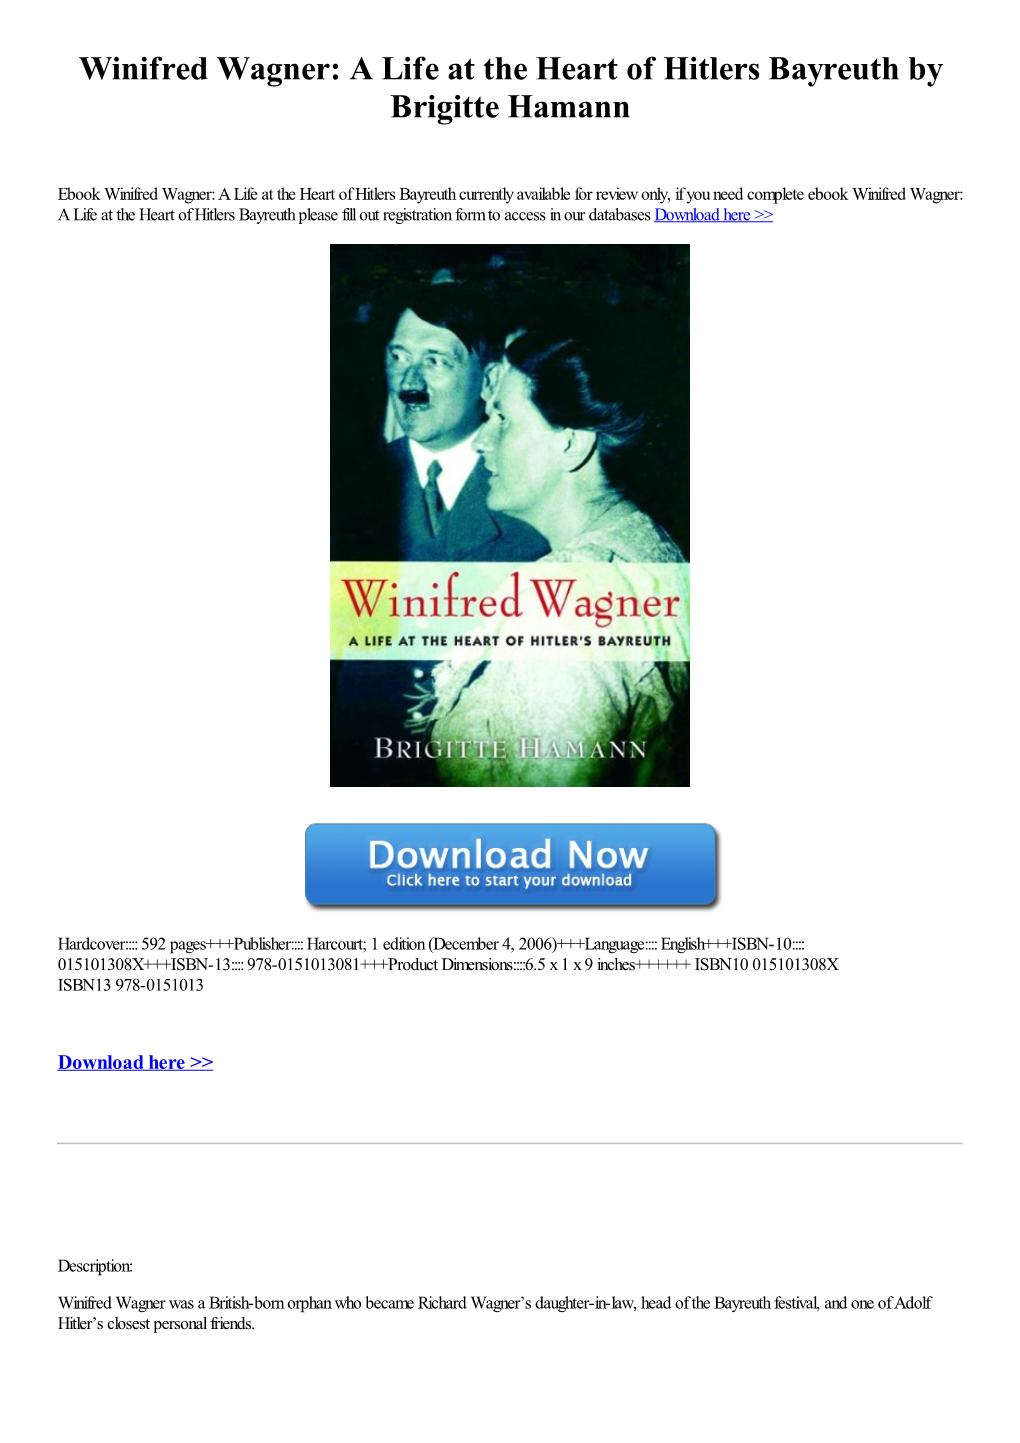 Winifred Wagner: a Life at the Heart of Hitlers Bayreuth by Brigitte Hamann